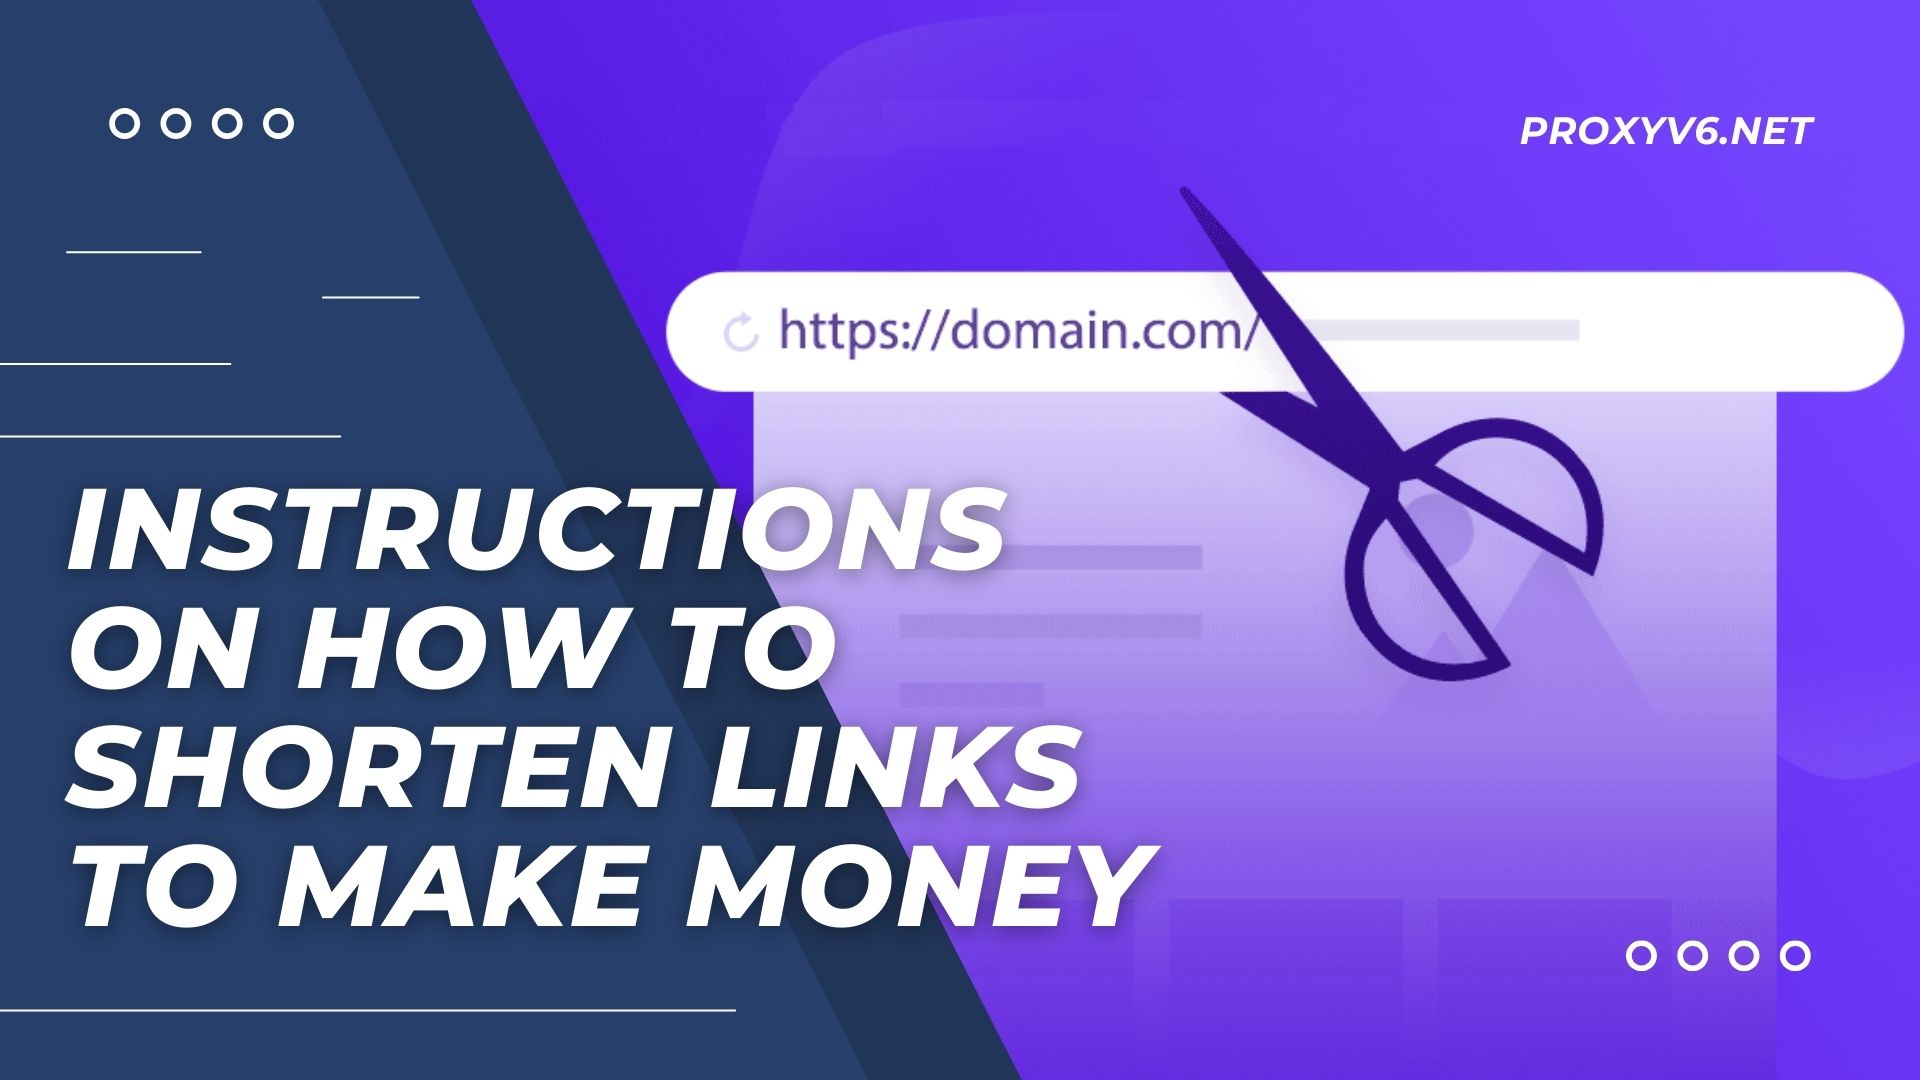 Instructions on how to shorten links to make money